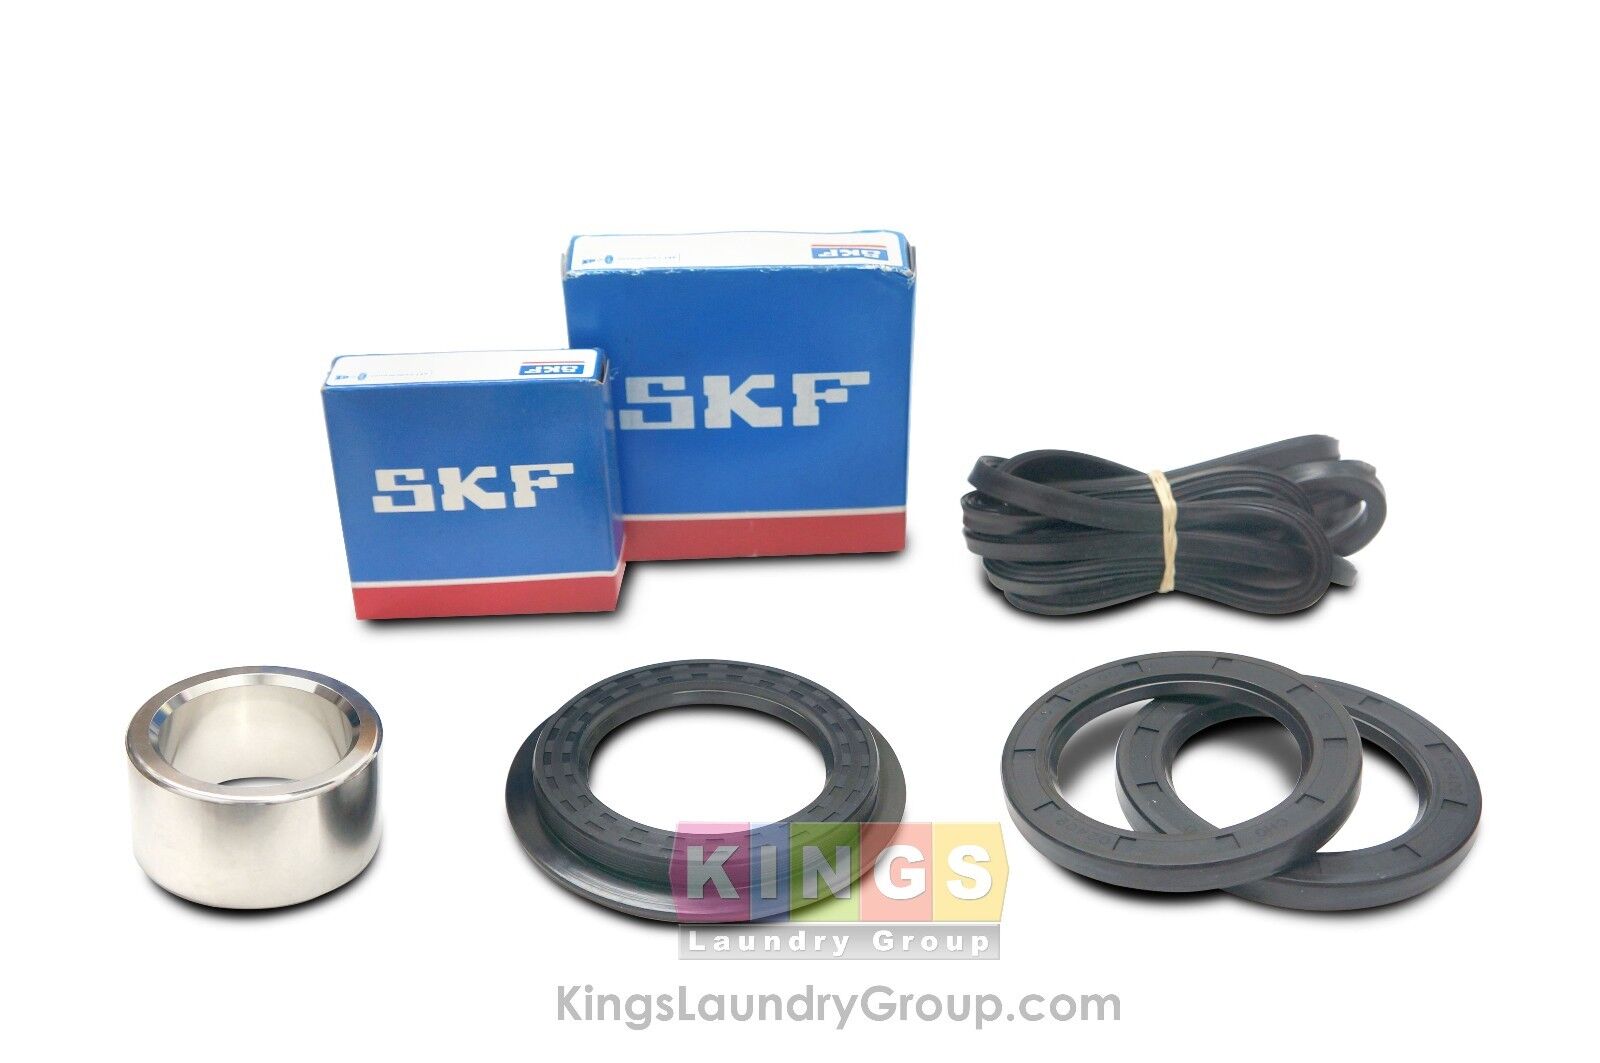 SKF BEARING KIT FOR WASCOMAT WASHER W620, E620, EX618 Part #  991312 COMPLETE